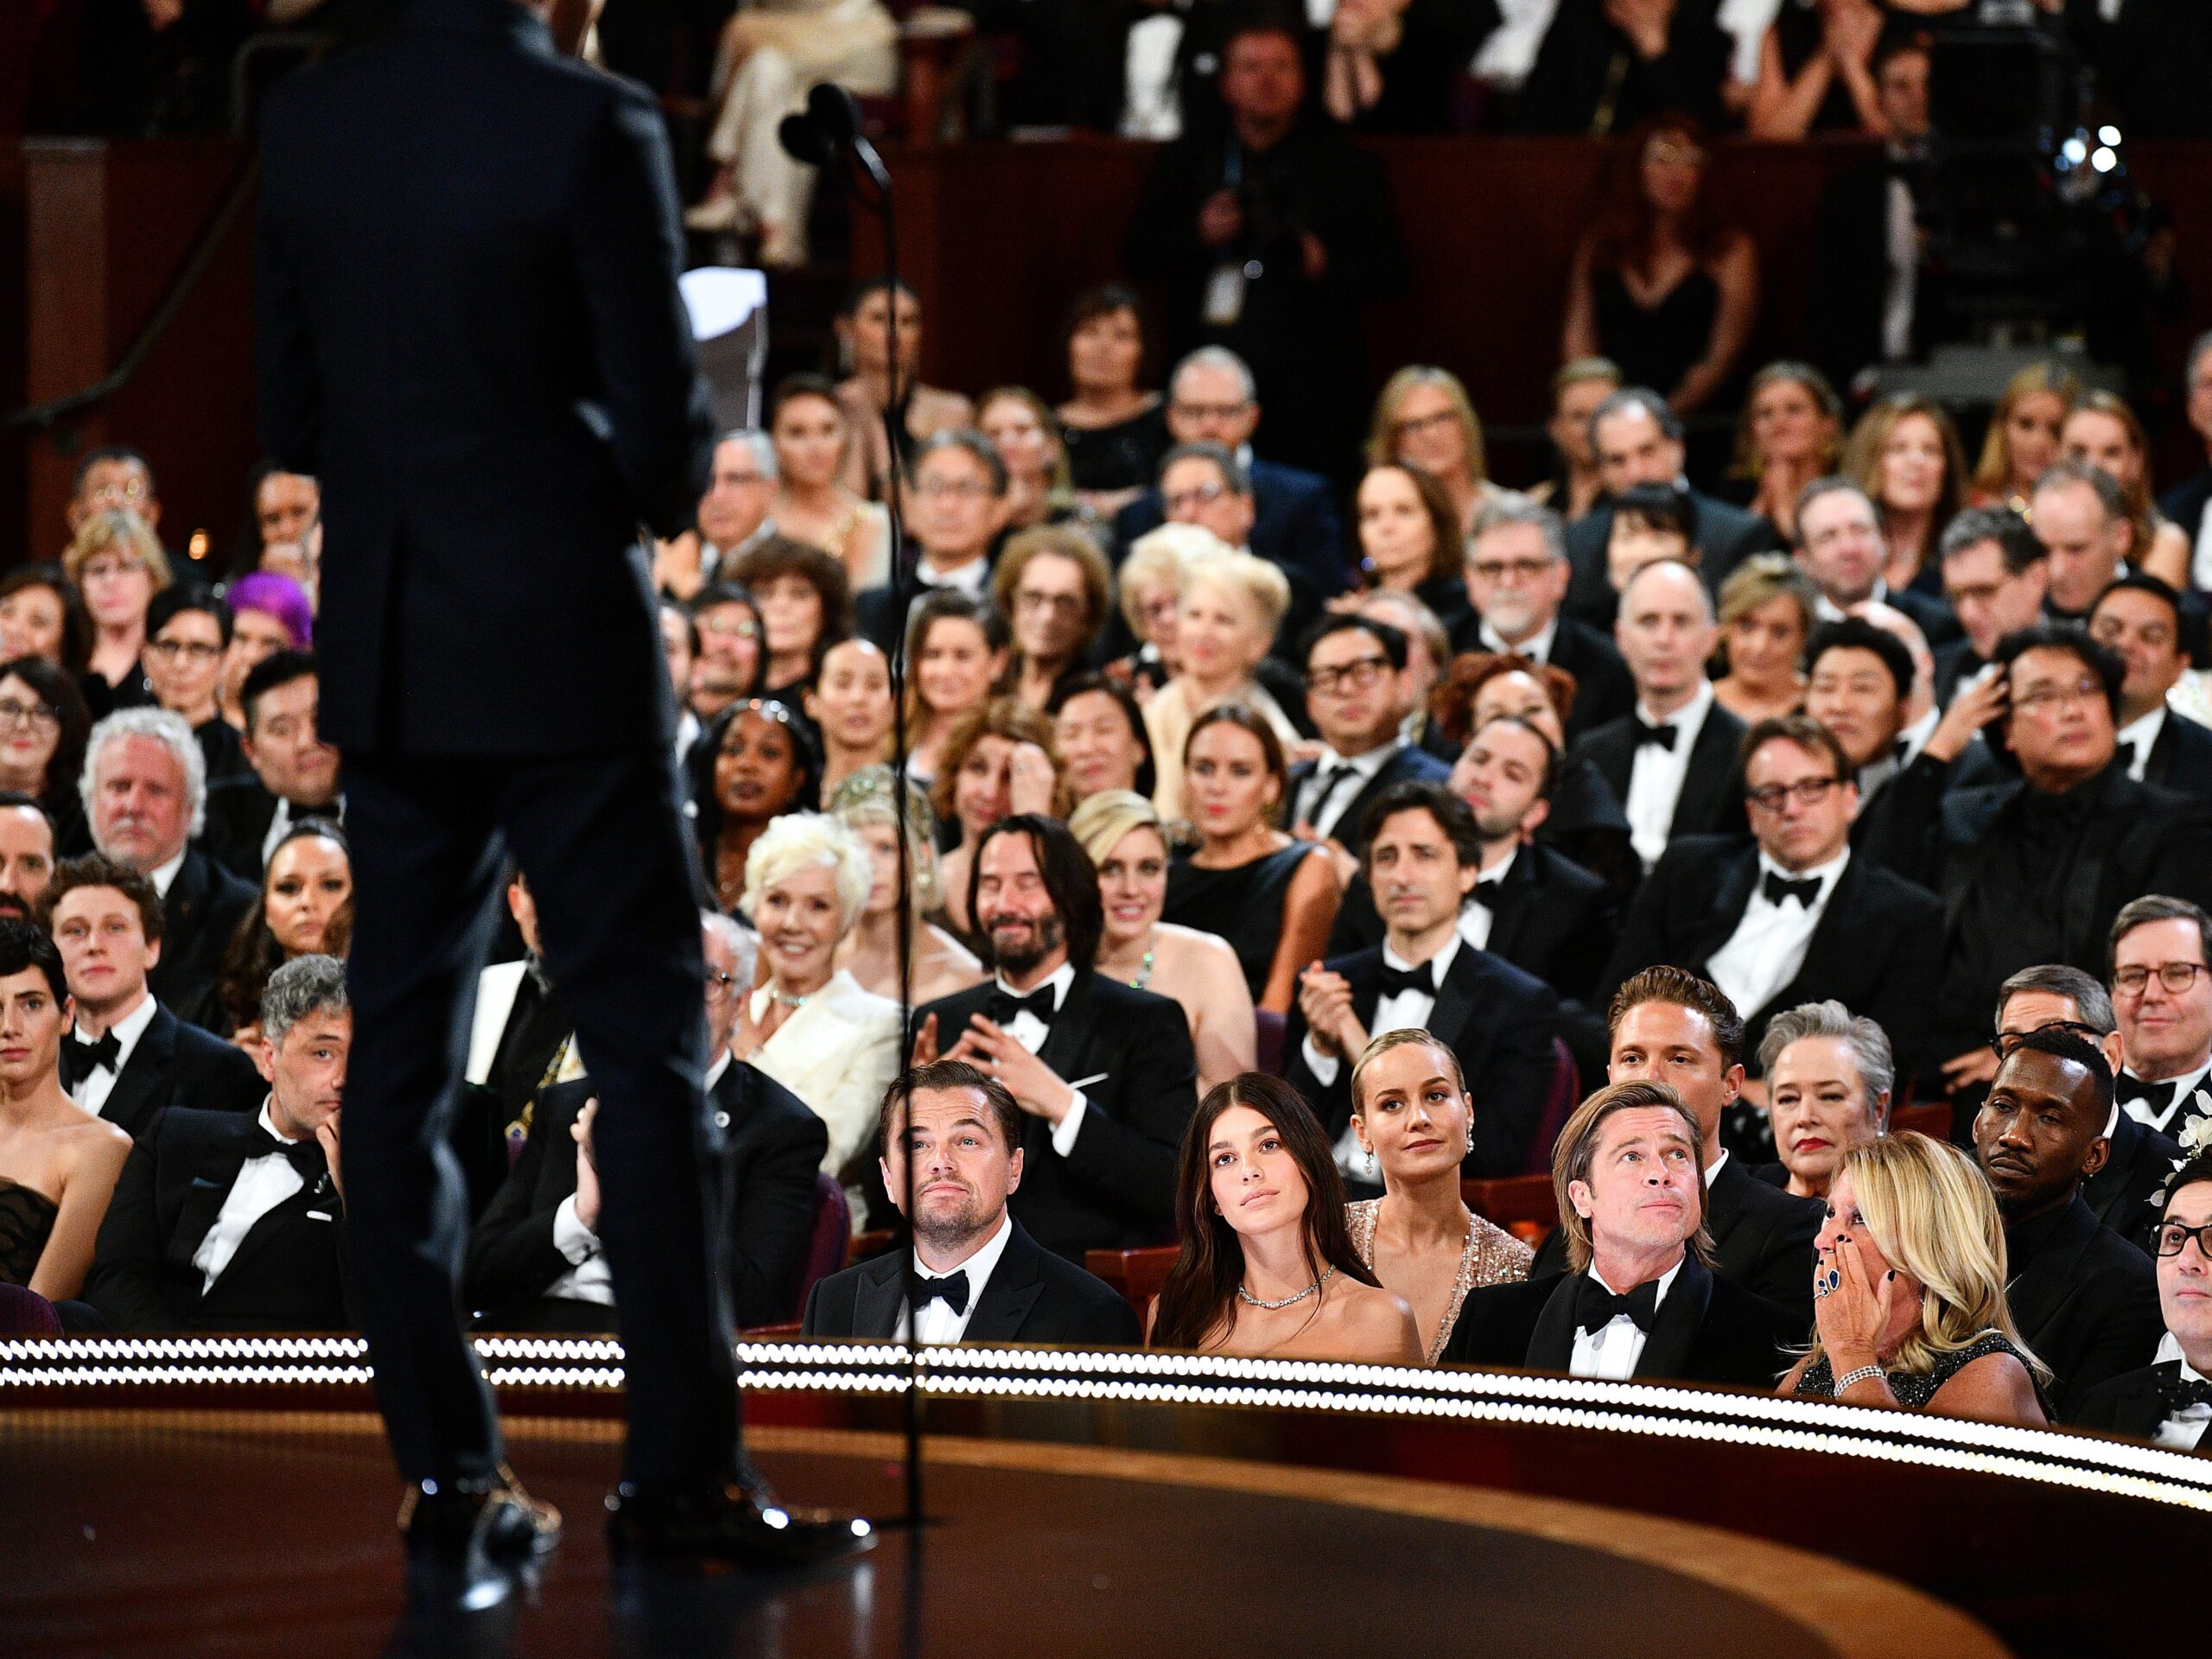 FEBRUARY 09: In this handout photo provided by A.M.P.A.S. Leonardo DiCaprio, Brie Larson, Brad Pitt, Kathy Bates and Mahershala Ali sit in the audience during the 92nd Annual Academy Awards at the Dolby Theatre on February 09, 2020 in Hollywood, California.